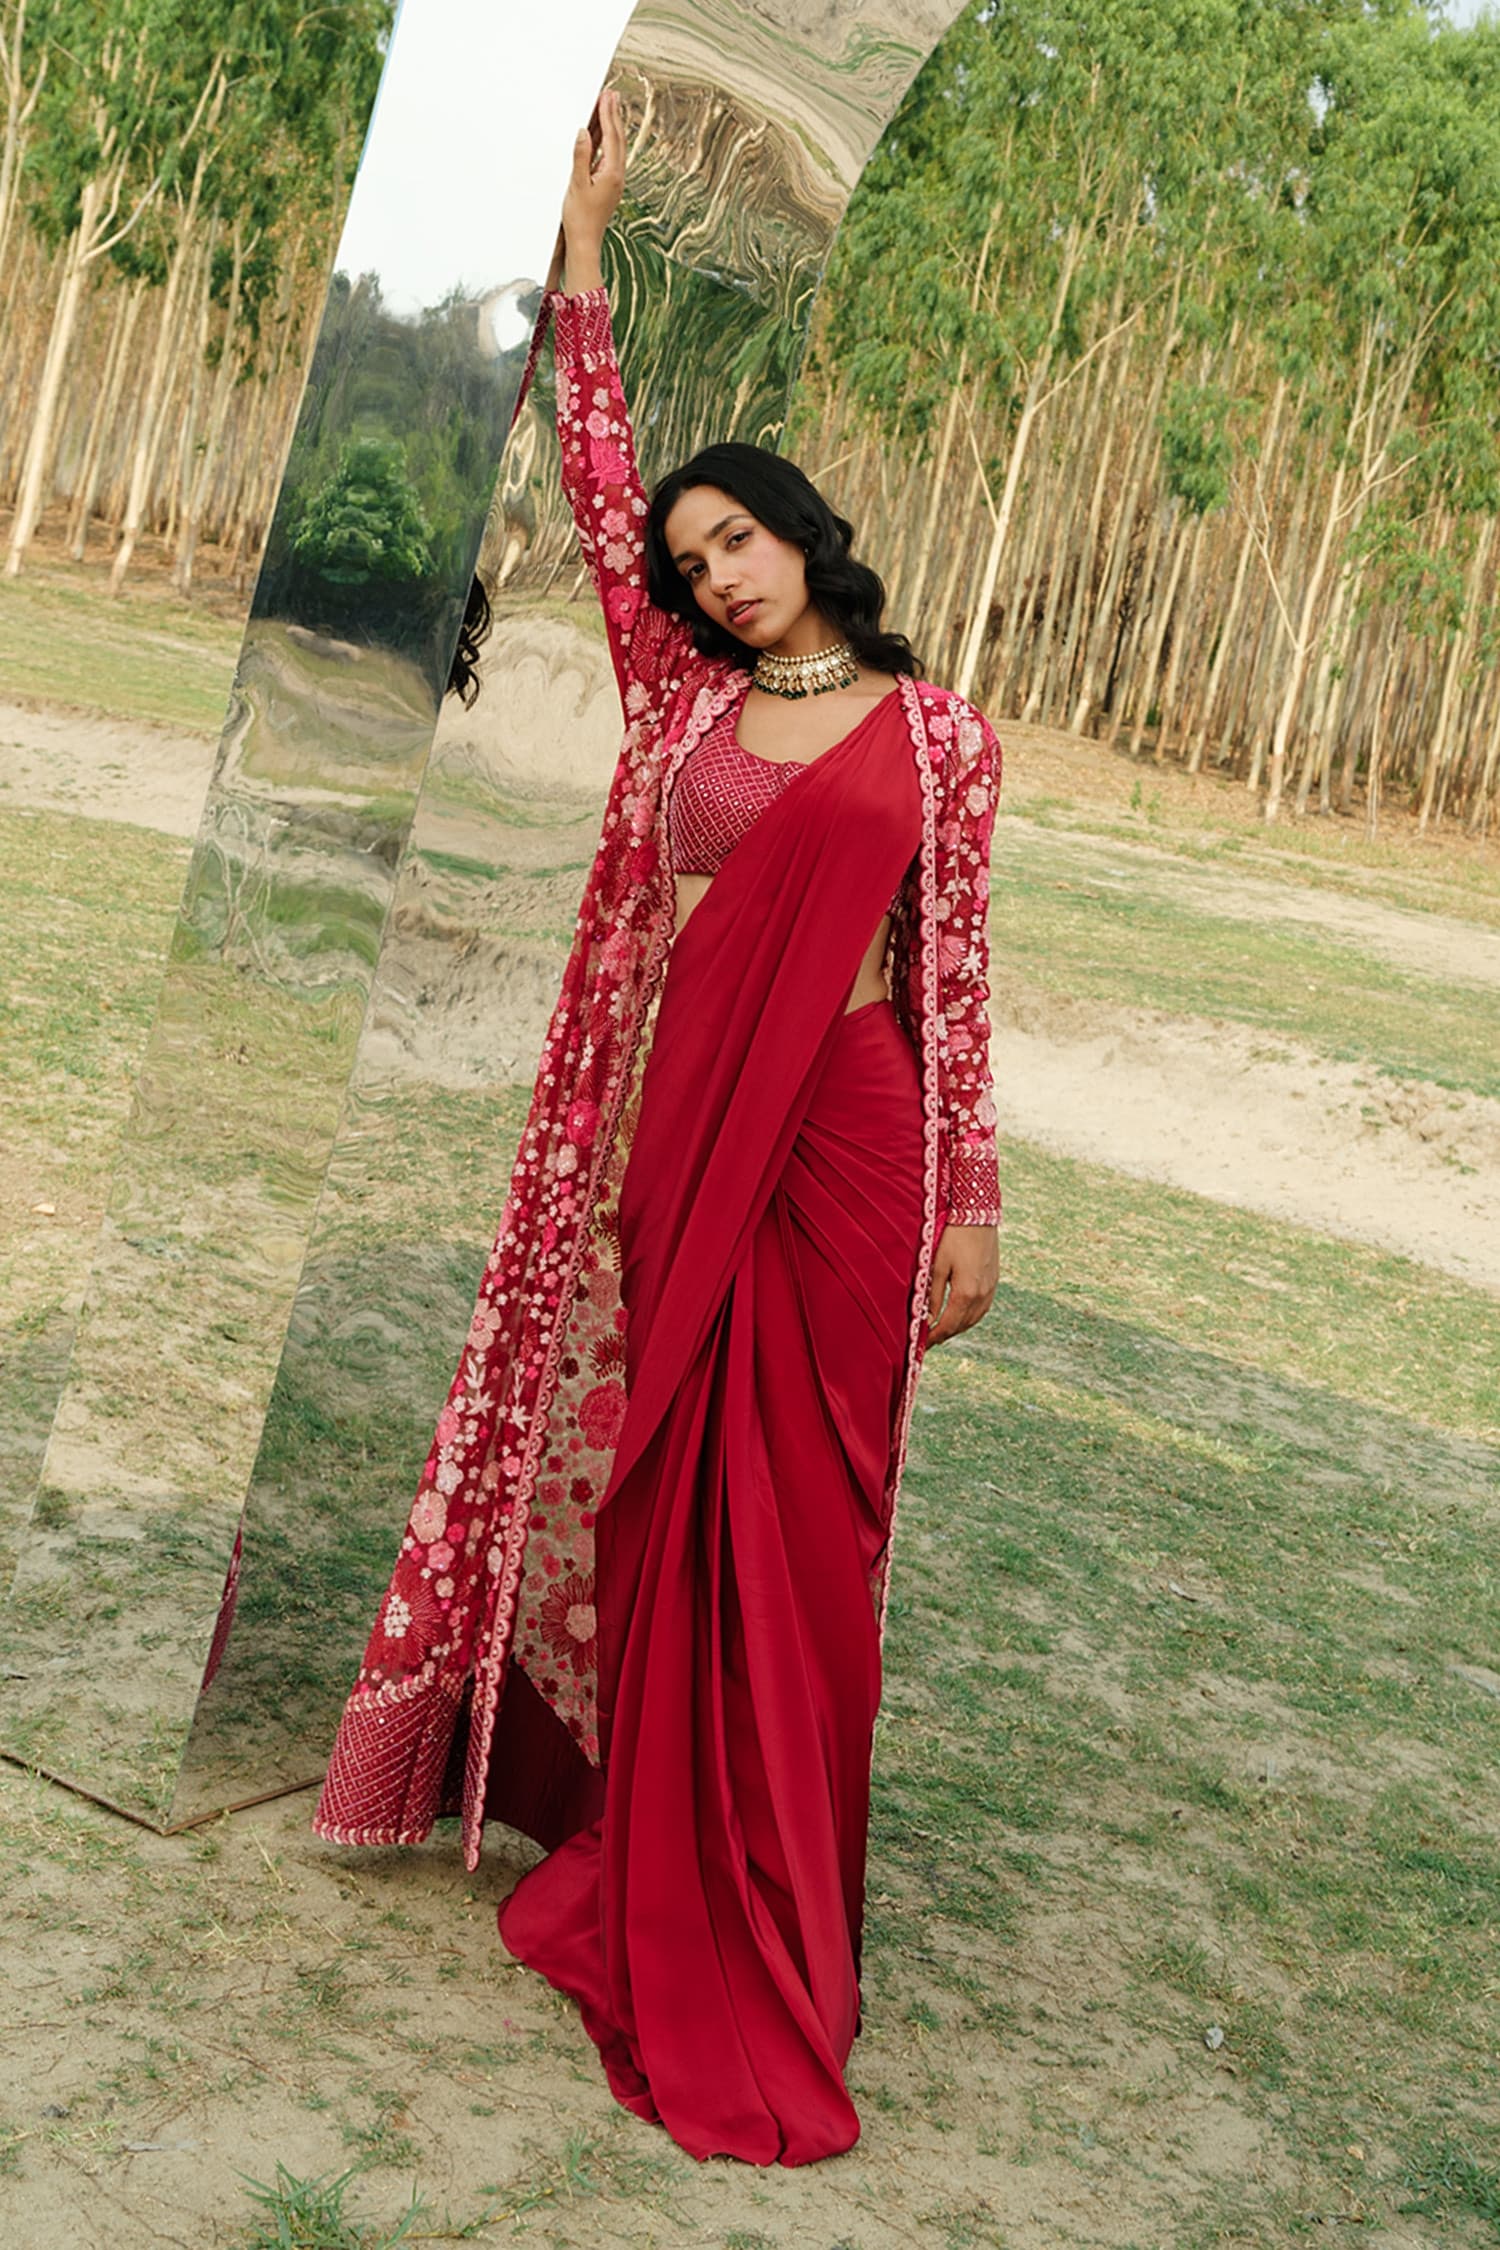 CTC West | Chic winter outfits, Saree jackets, Saree accessories